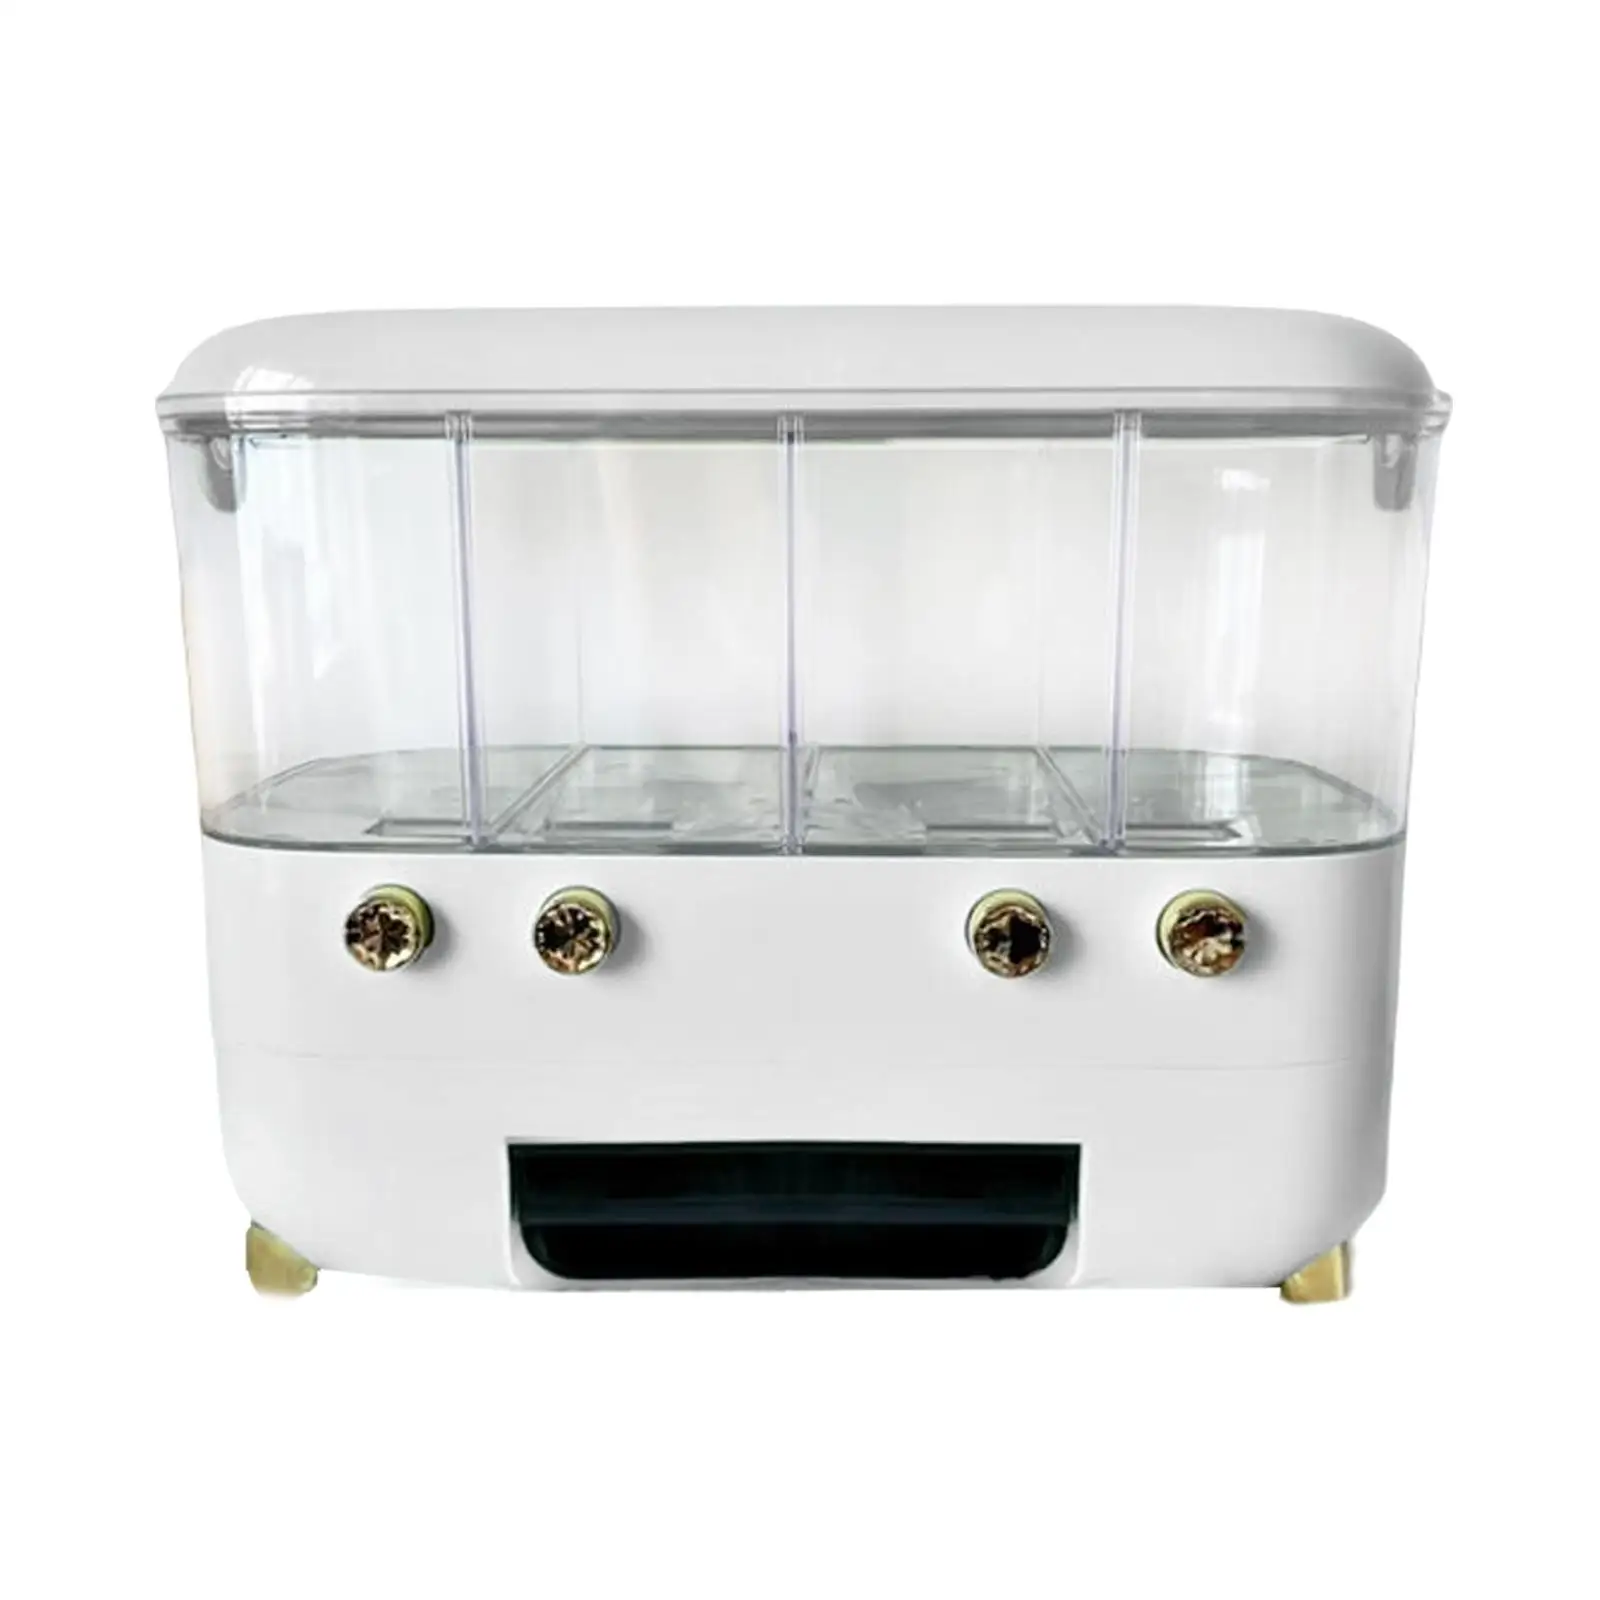 Kitchen Grain Cereals Dispenser Rice Bucket 4 Grid Easily Clean with Lid for Soybeans, Corn, Rice, Red Beans Smooth Surface